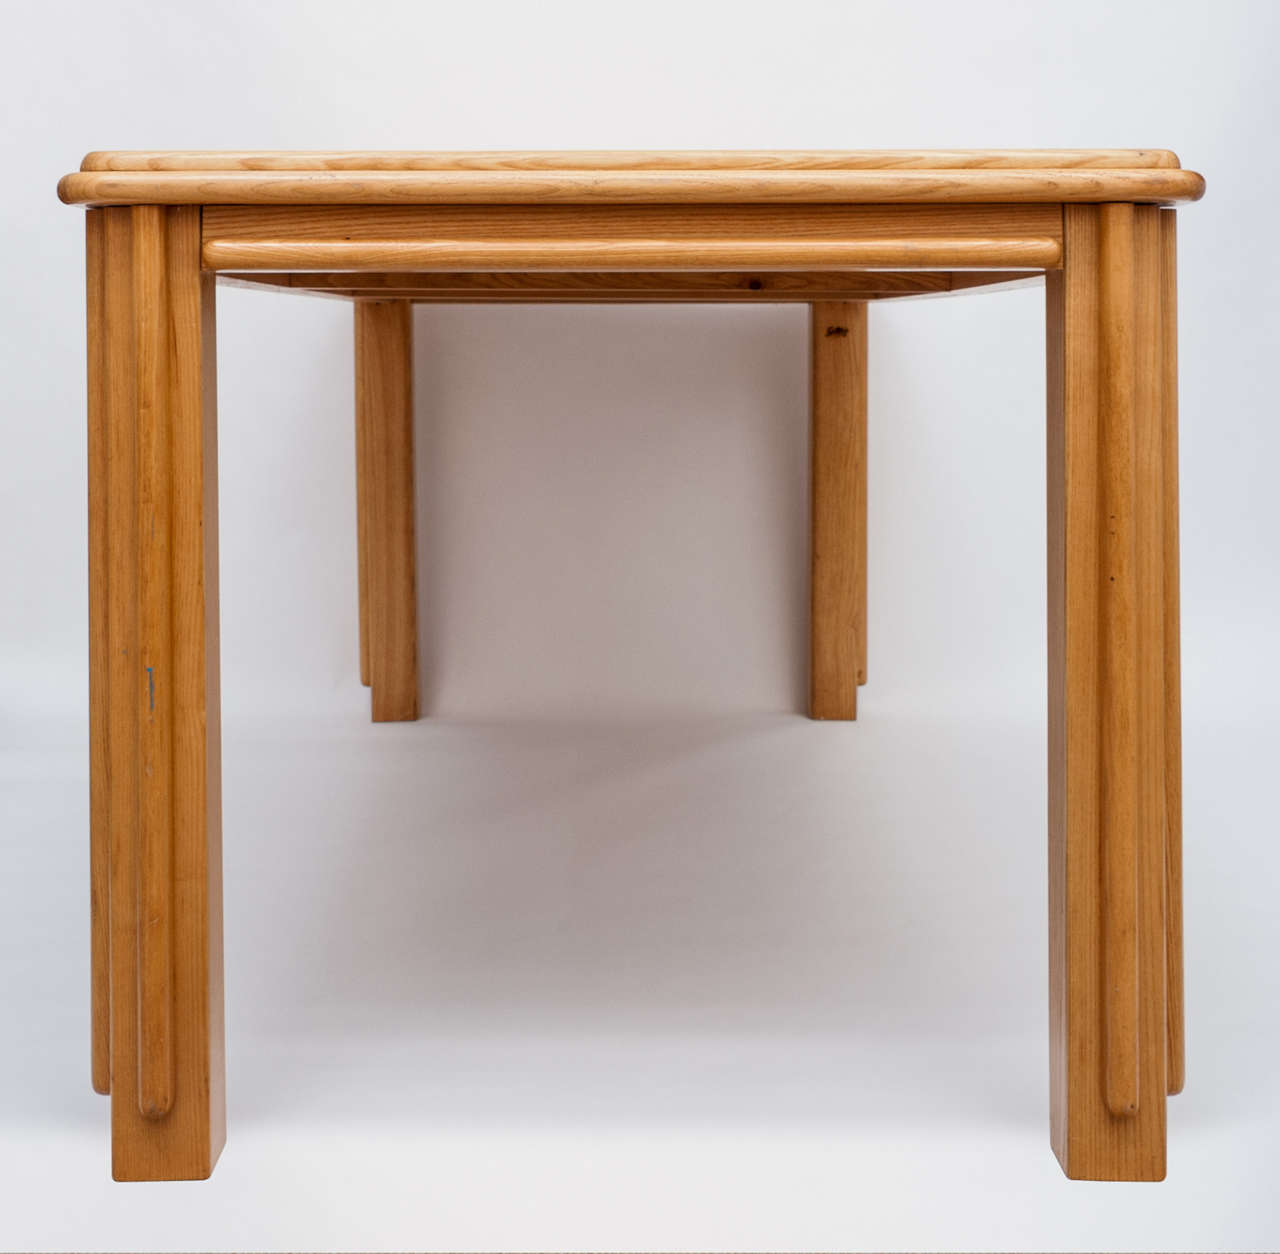 Ettore Sottsass ash wood table “Vienna”, Italy circa 1989 For Sale 2